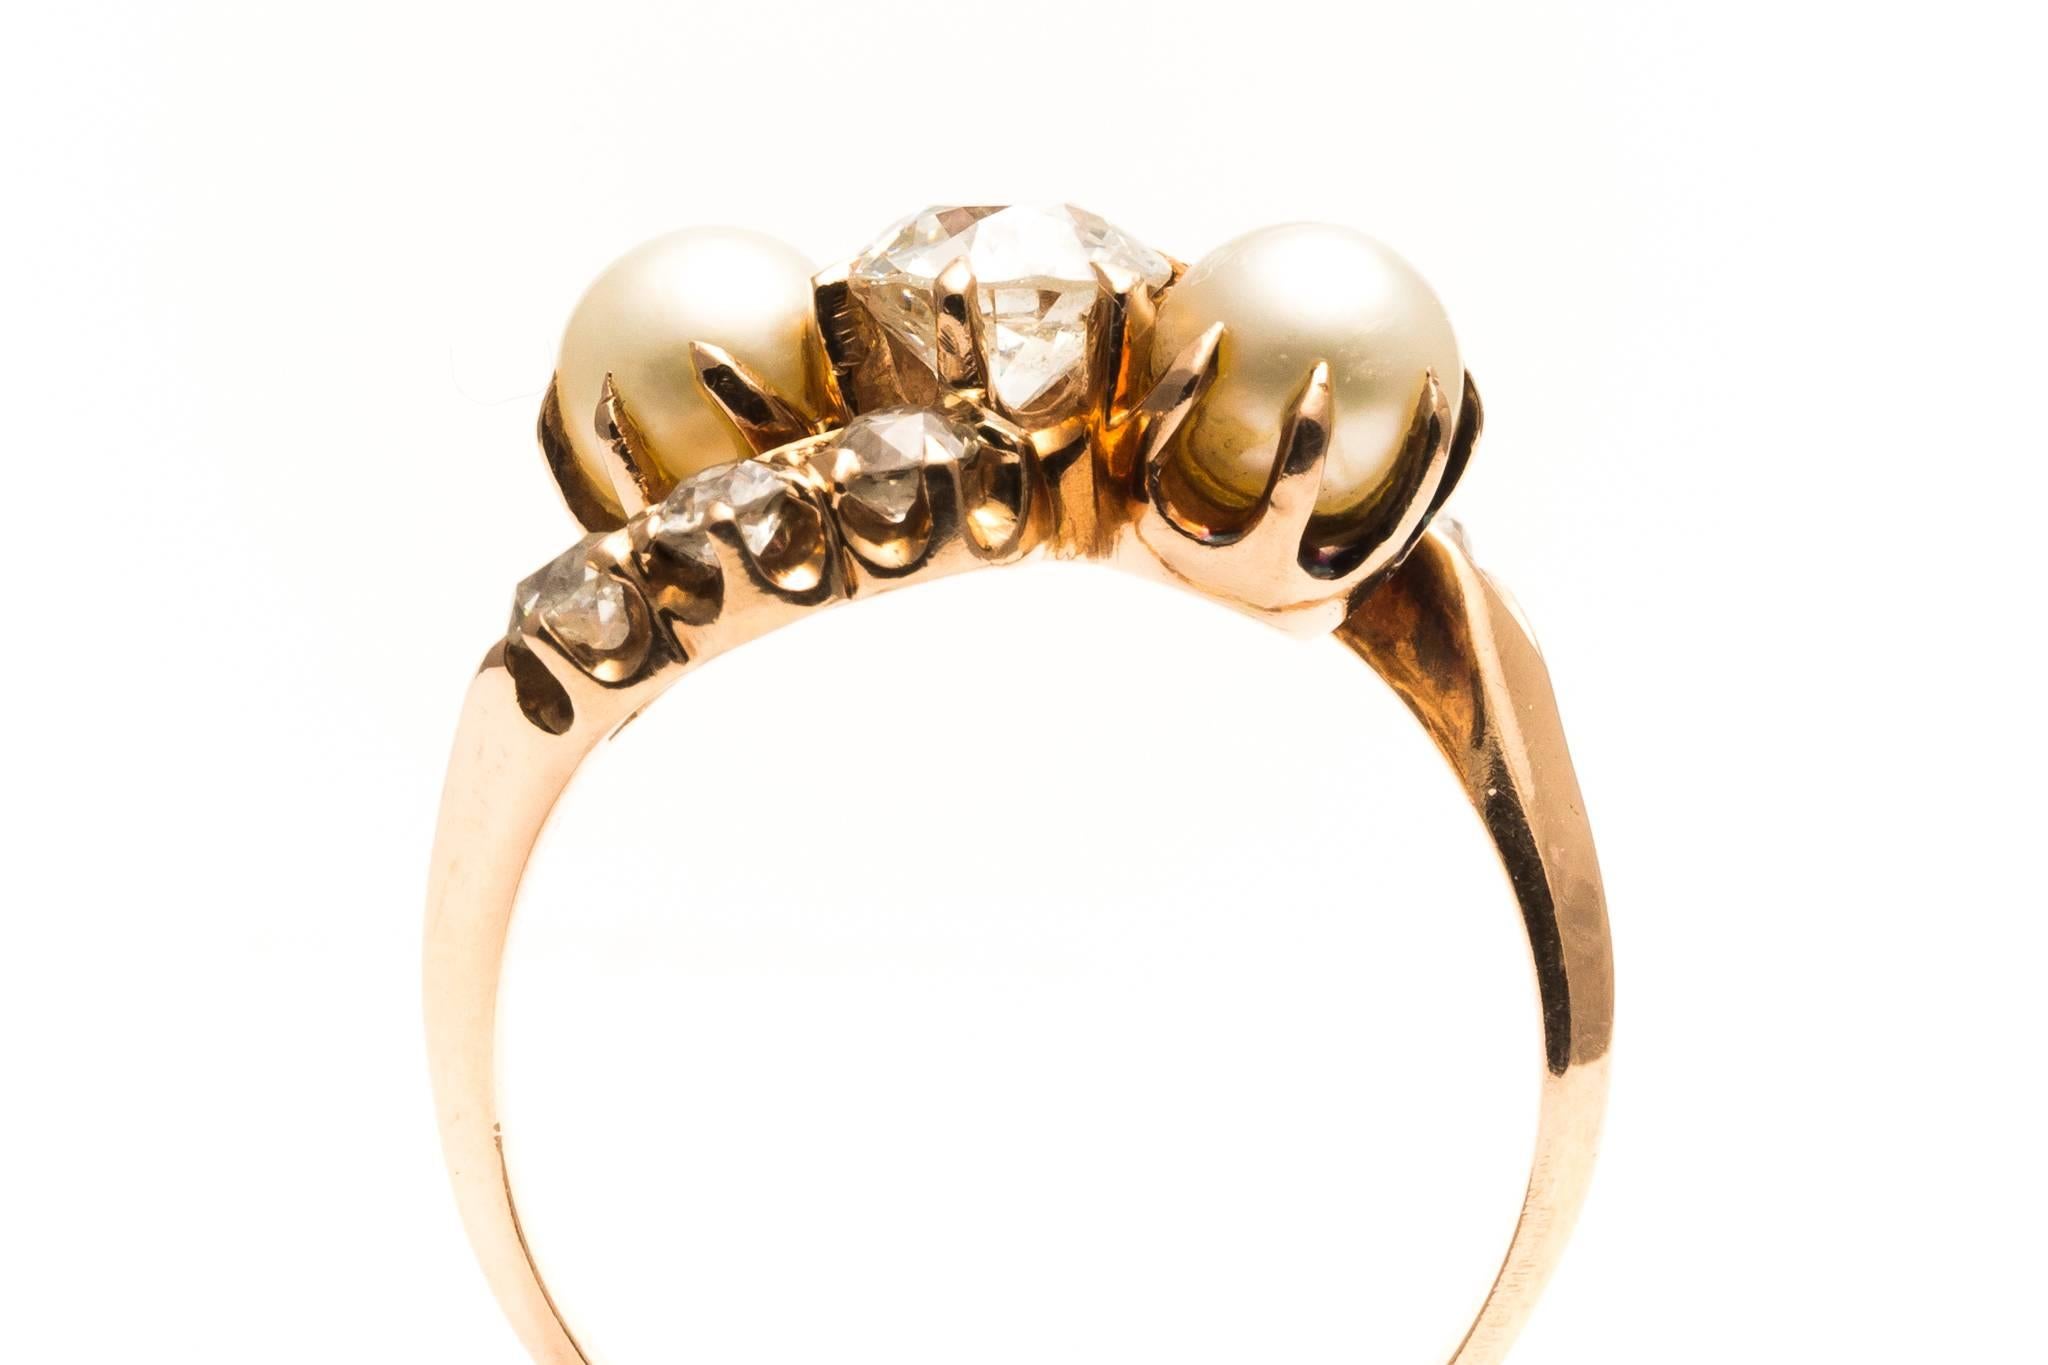 Entrancing Edwardian 1.20 Carat Diamond and Pearl Ring in Yellow Gold 1